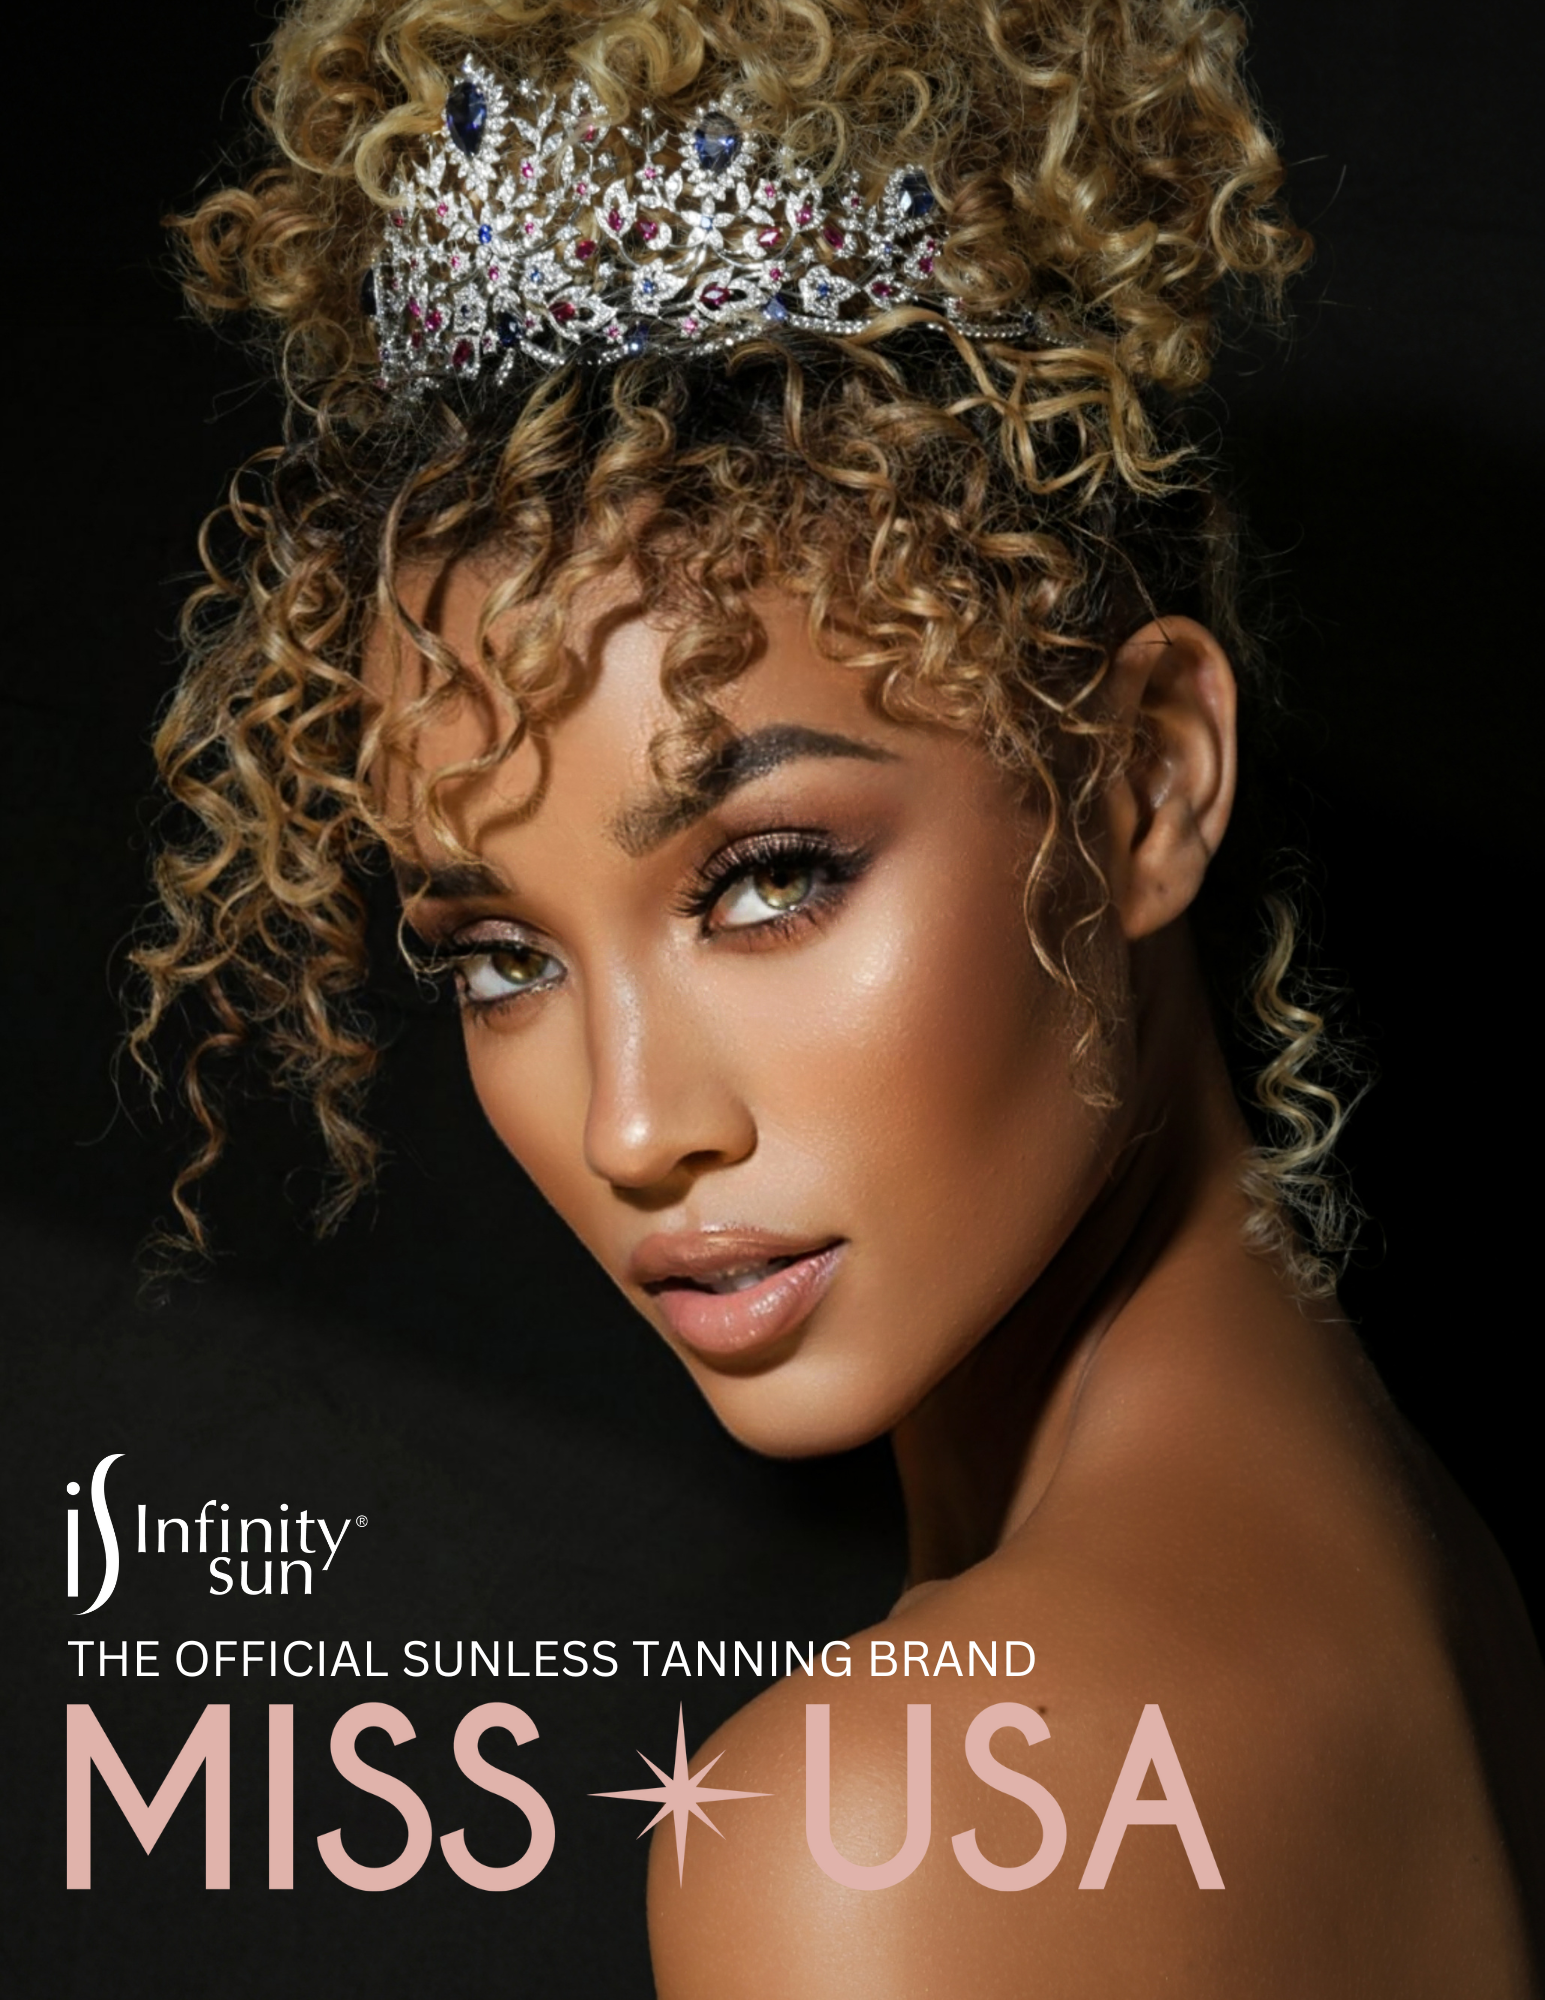 OFFICIAL SUNLESS BRAND OF MISS USA